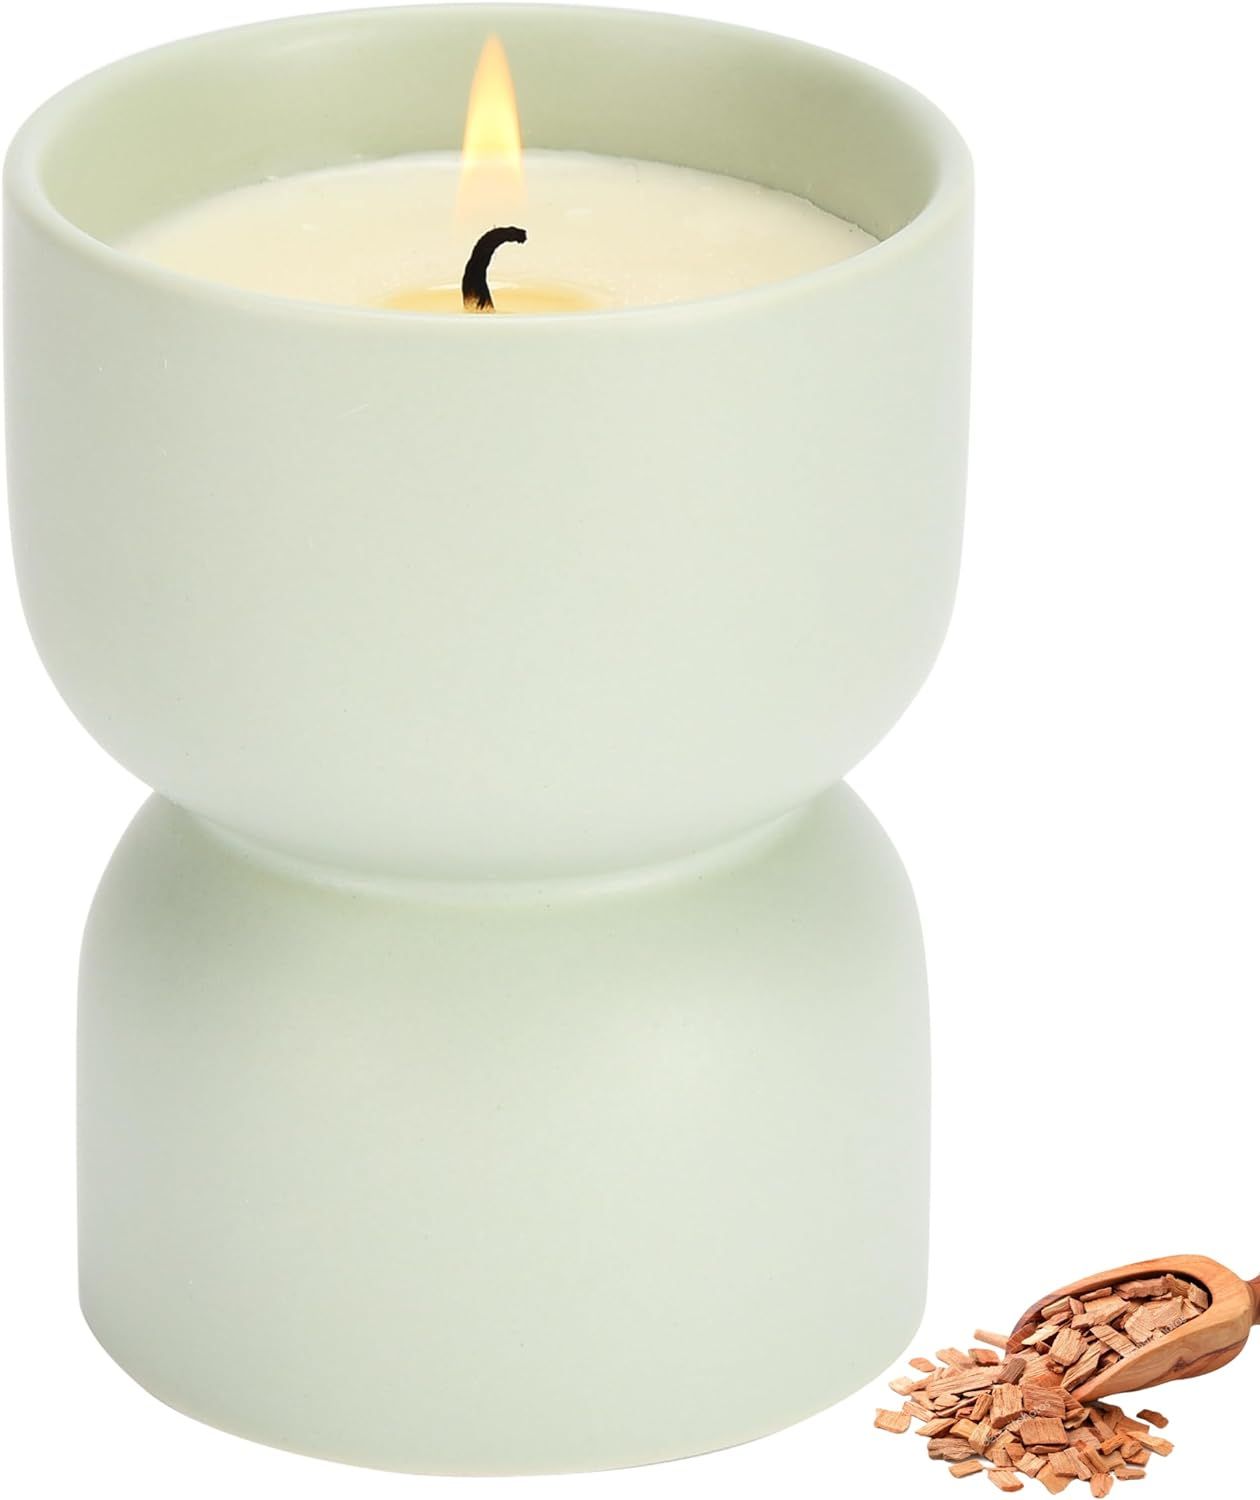 WHOLE HOUSEWARES Ceramic Scented Candle with Sandalwood Fragrance - Decorative Ligh Green Candle ... | Amazon (US)